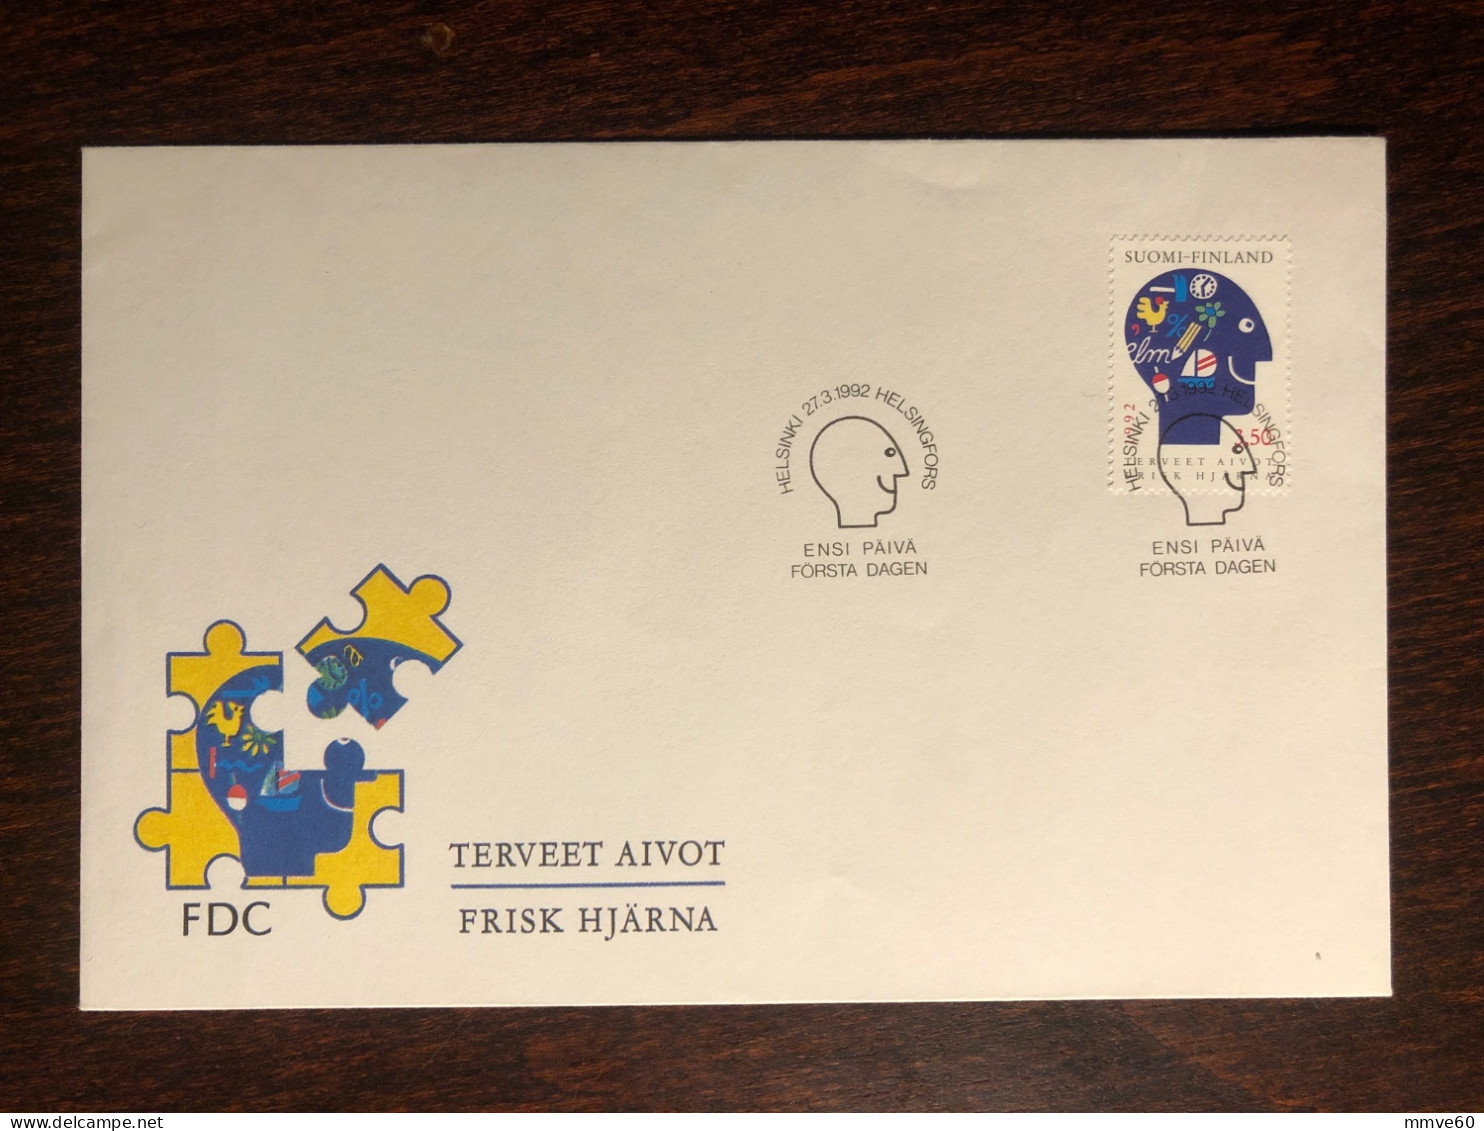 FINLAND FDC COVER 1992 YEAR PSYCHIATRY MENTAL HEALTH MEDICINE STAMPS - Covers & Documents